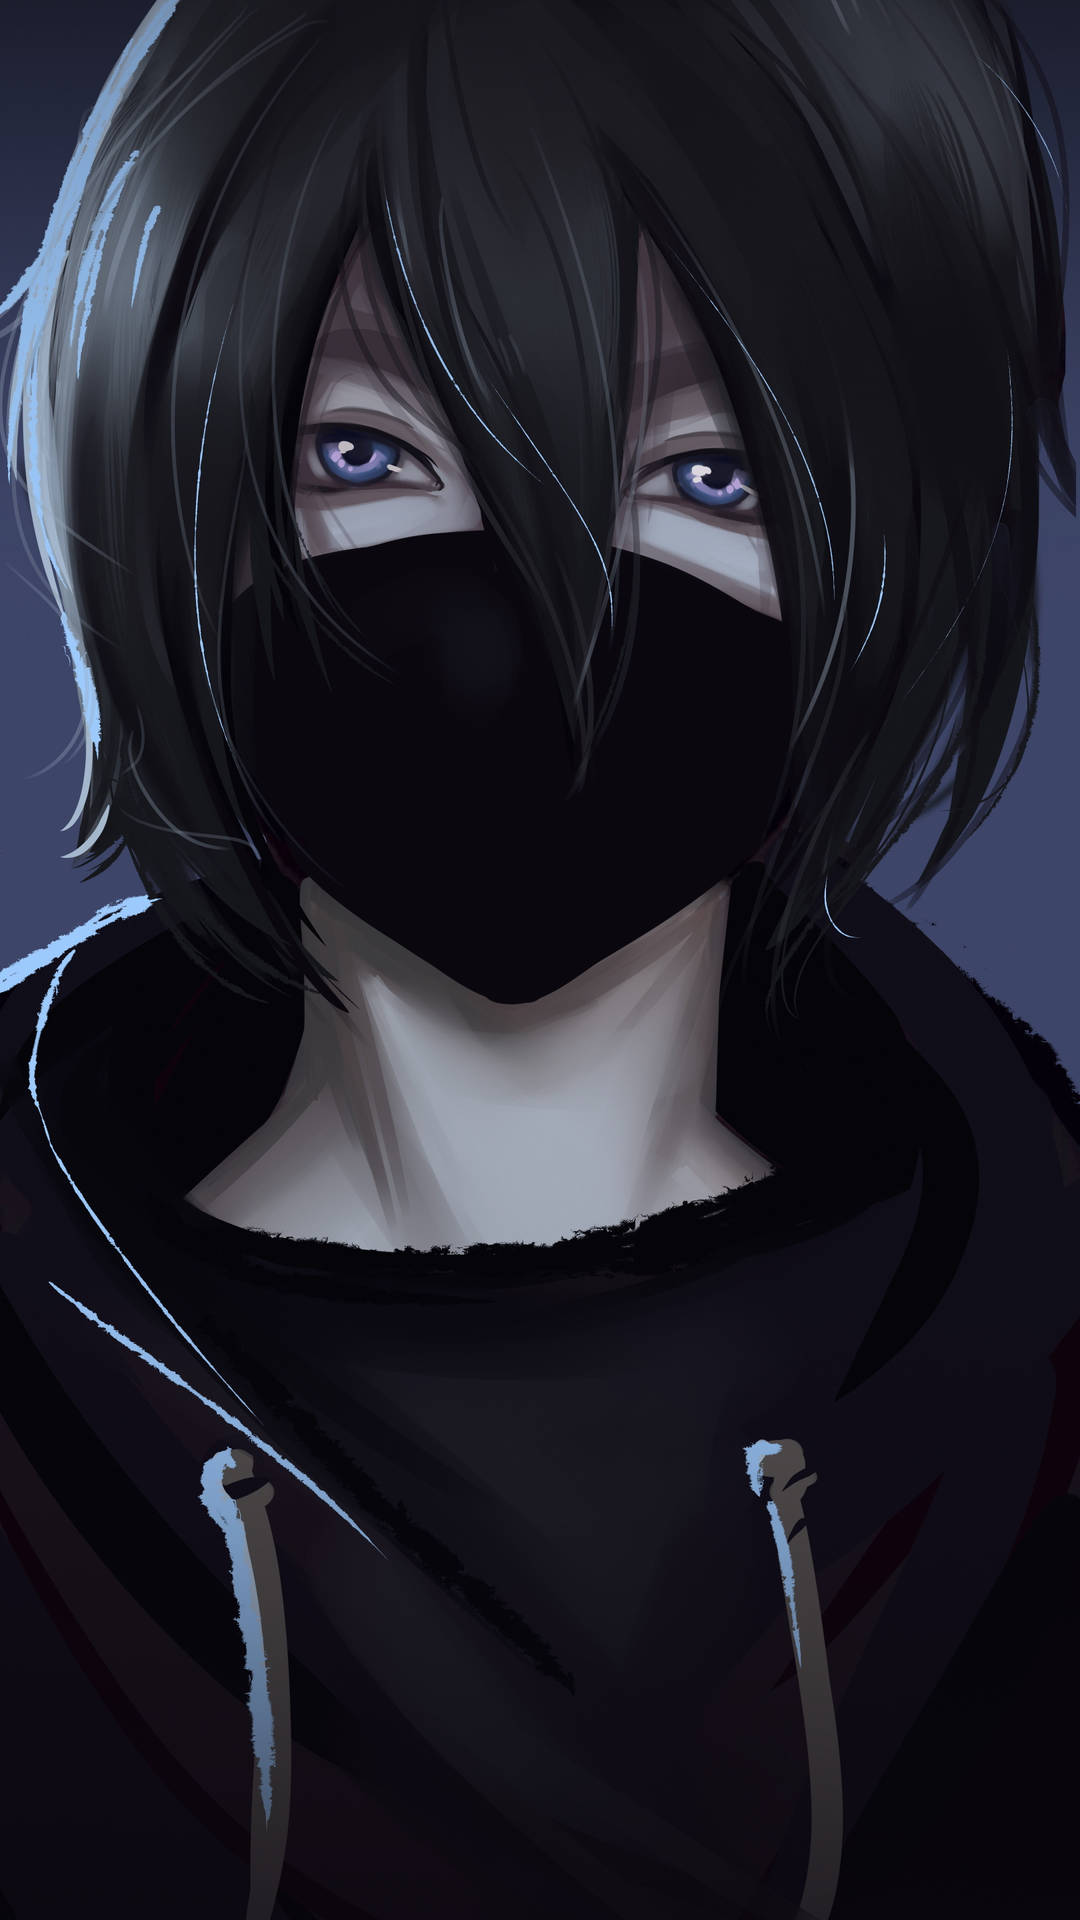 Download Cool Boy Anime With Black Mask Wallpaper 